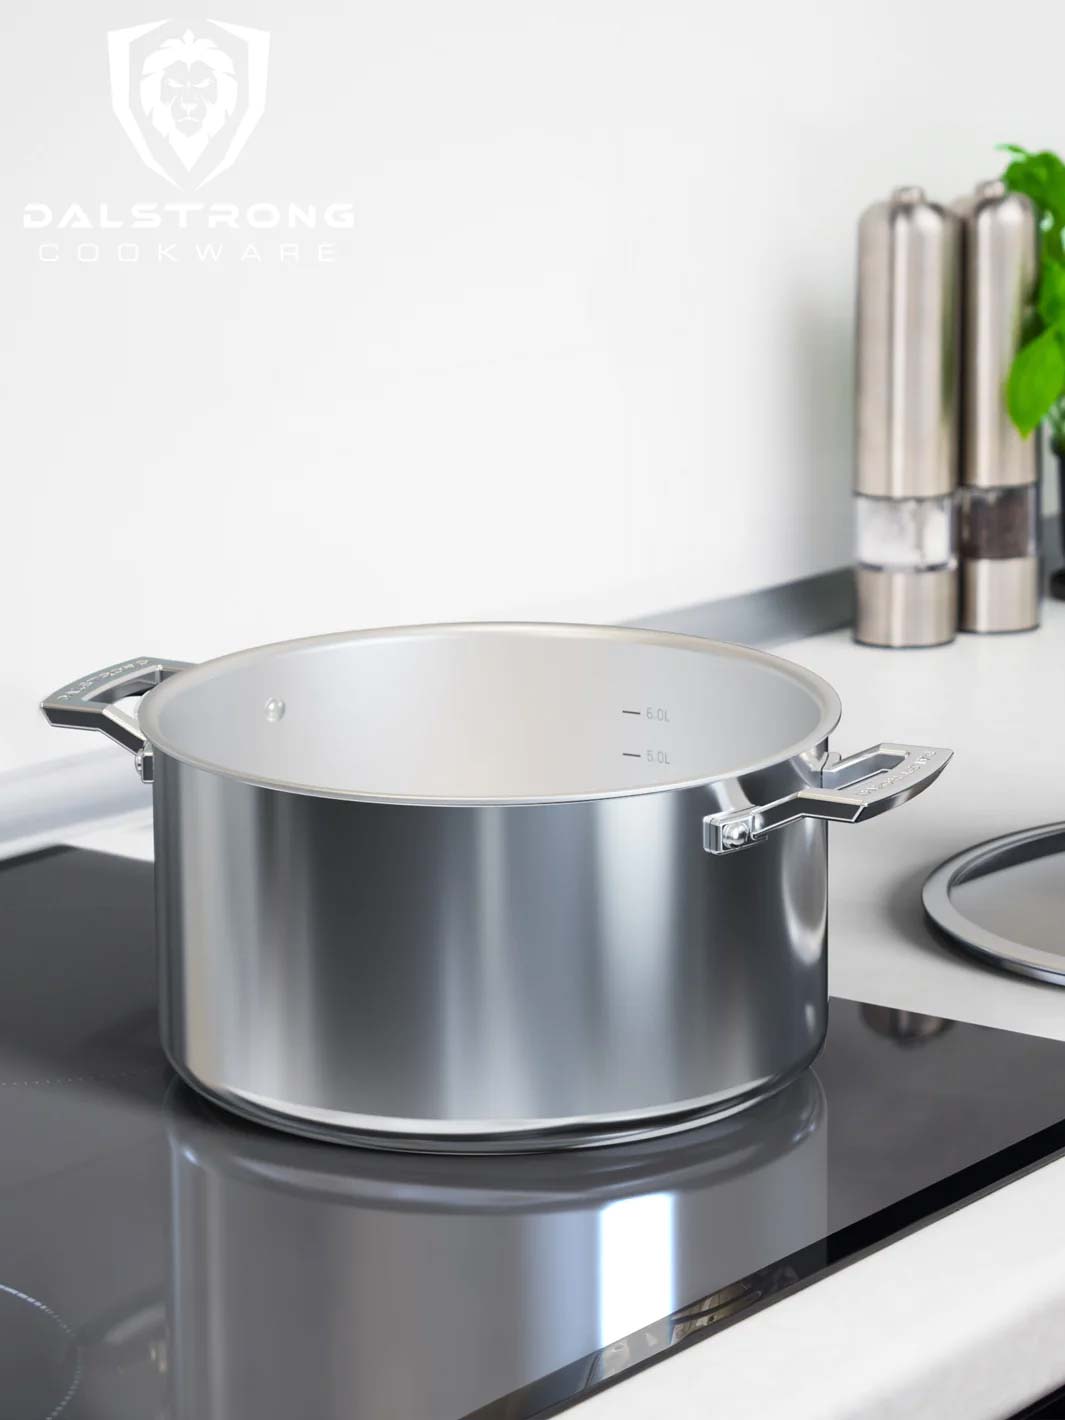 Dalstrong oberon series 8 quart stock pot silver on top of a stove.